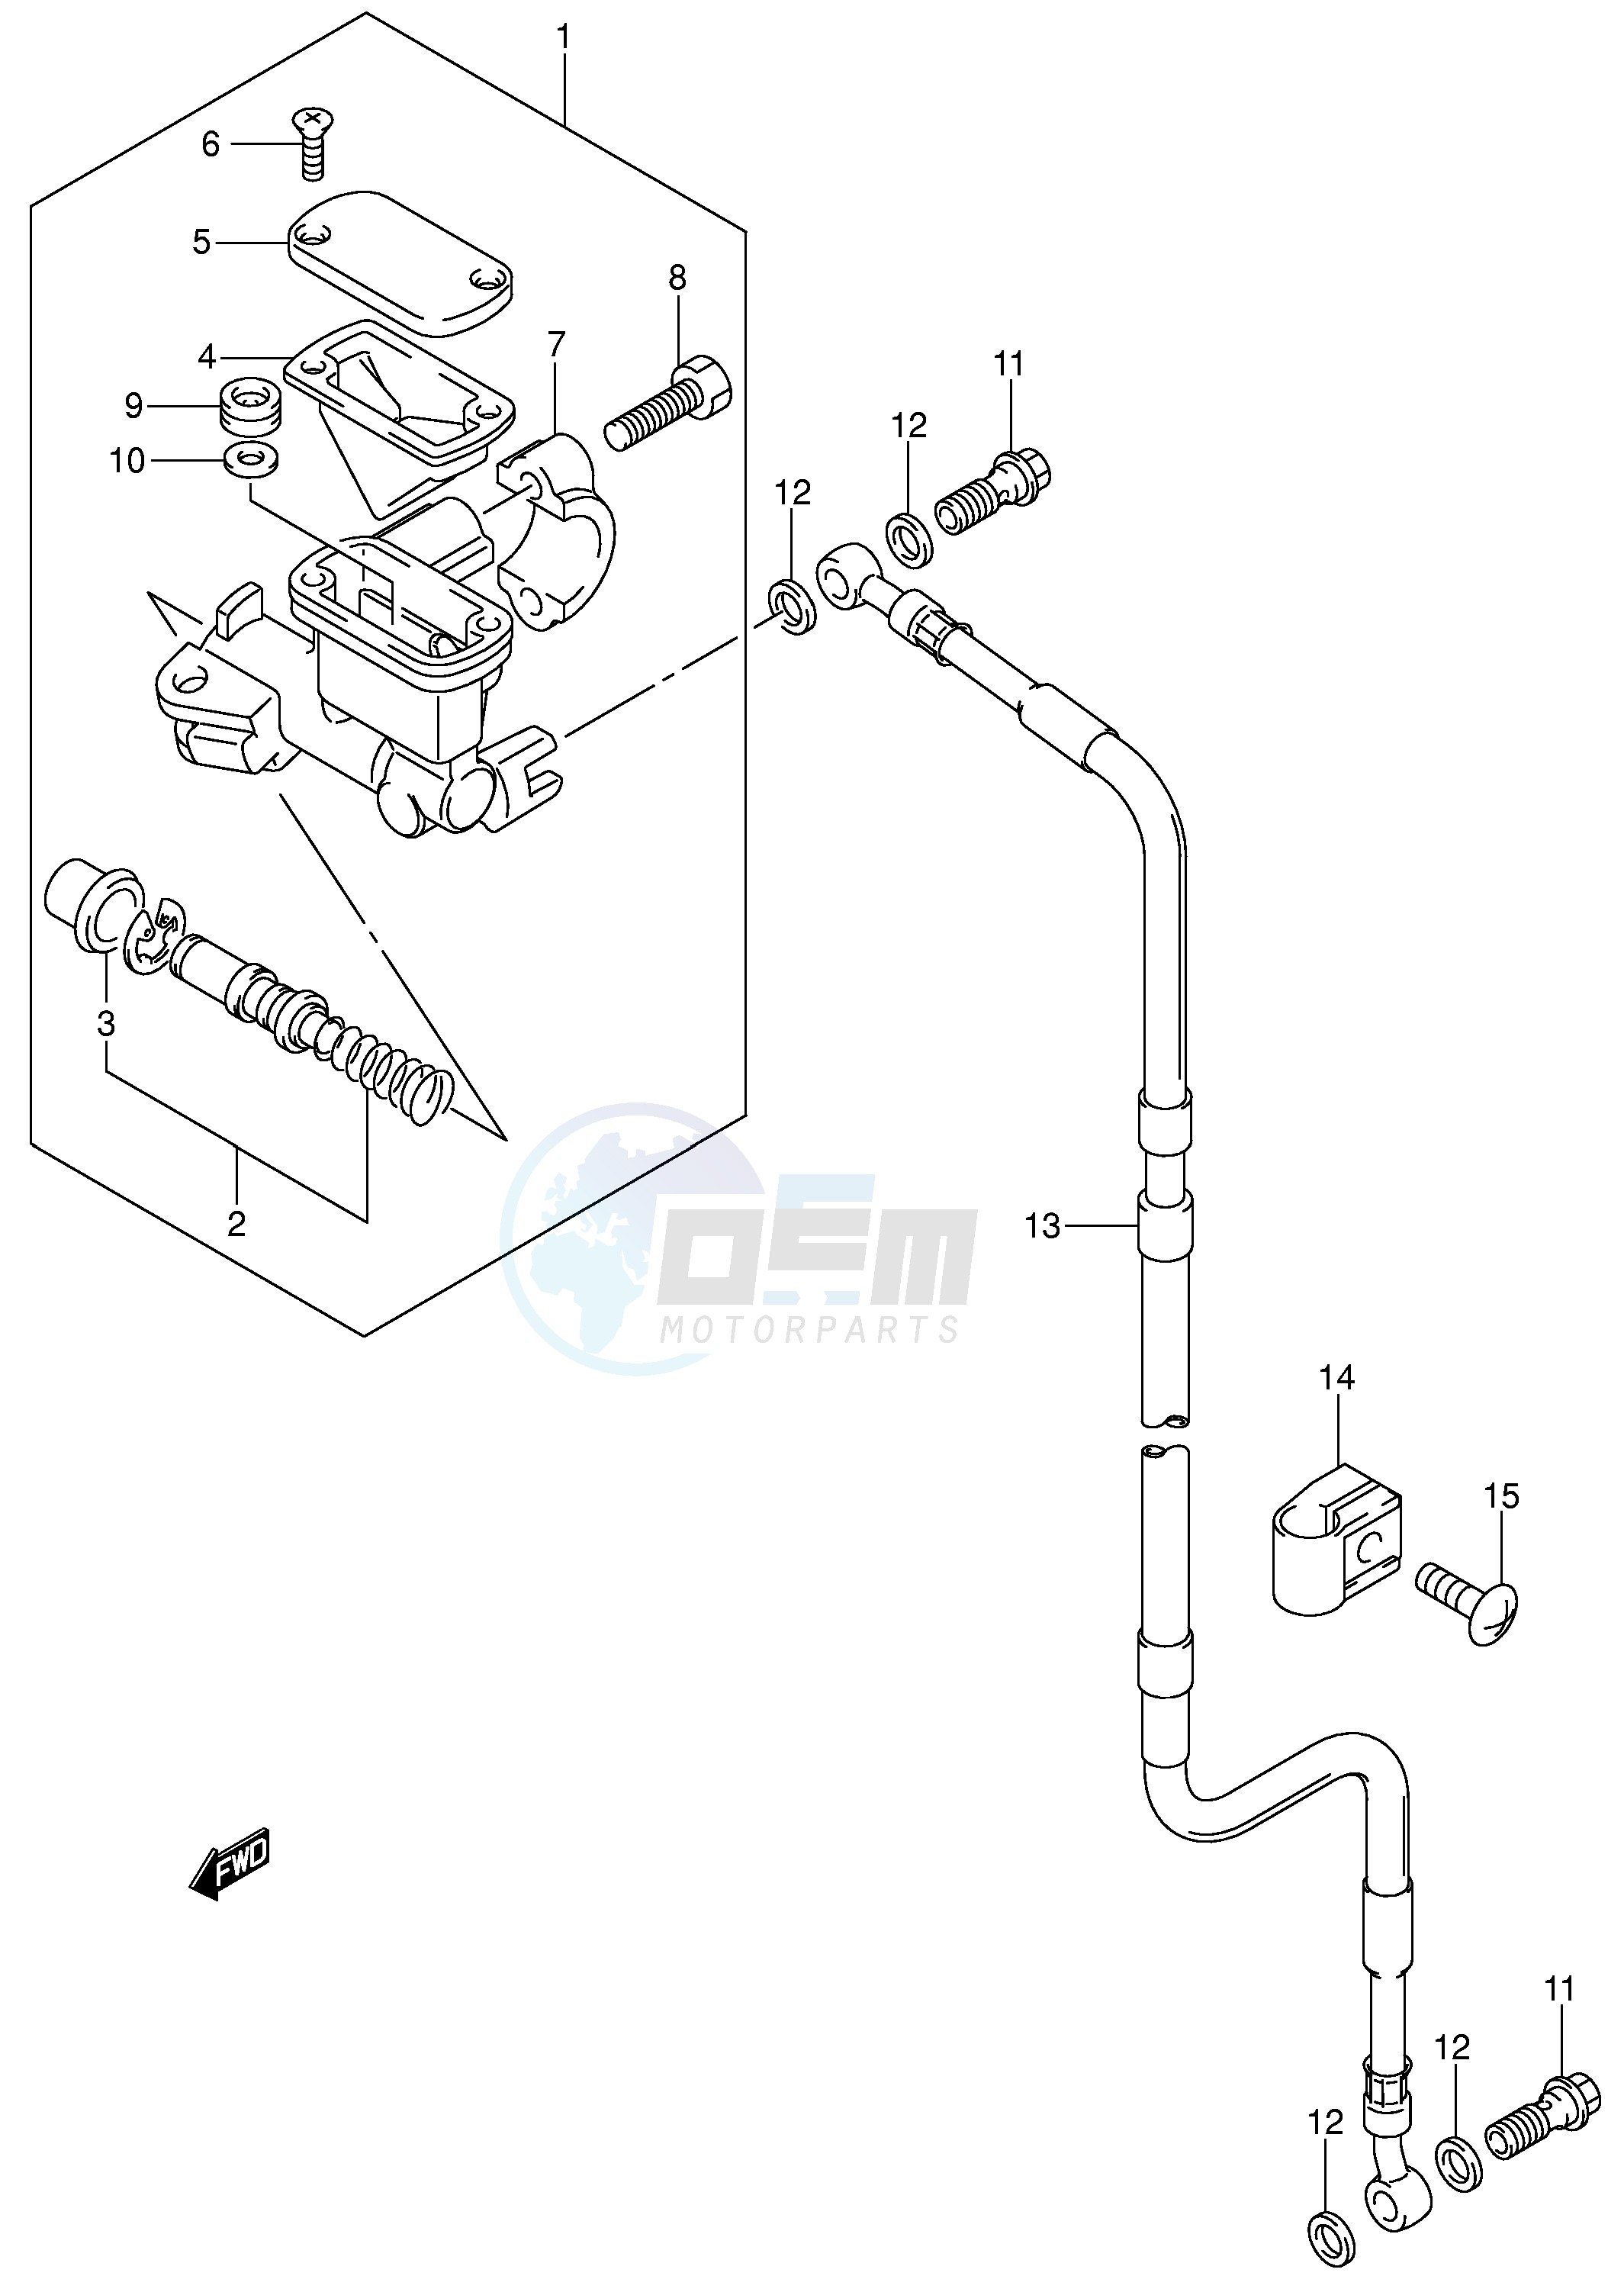 FRONT MASTER CYLINDER (SEE NOTE) blueprint